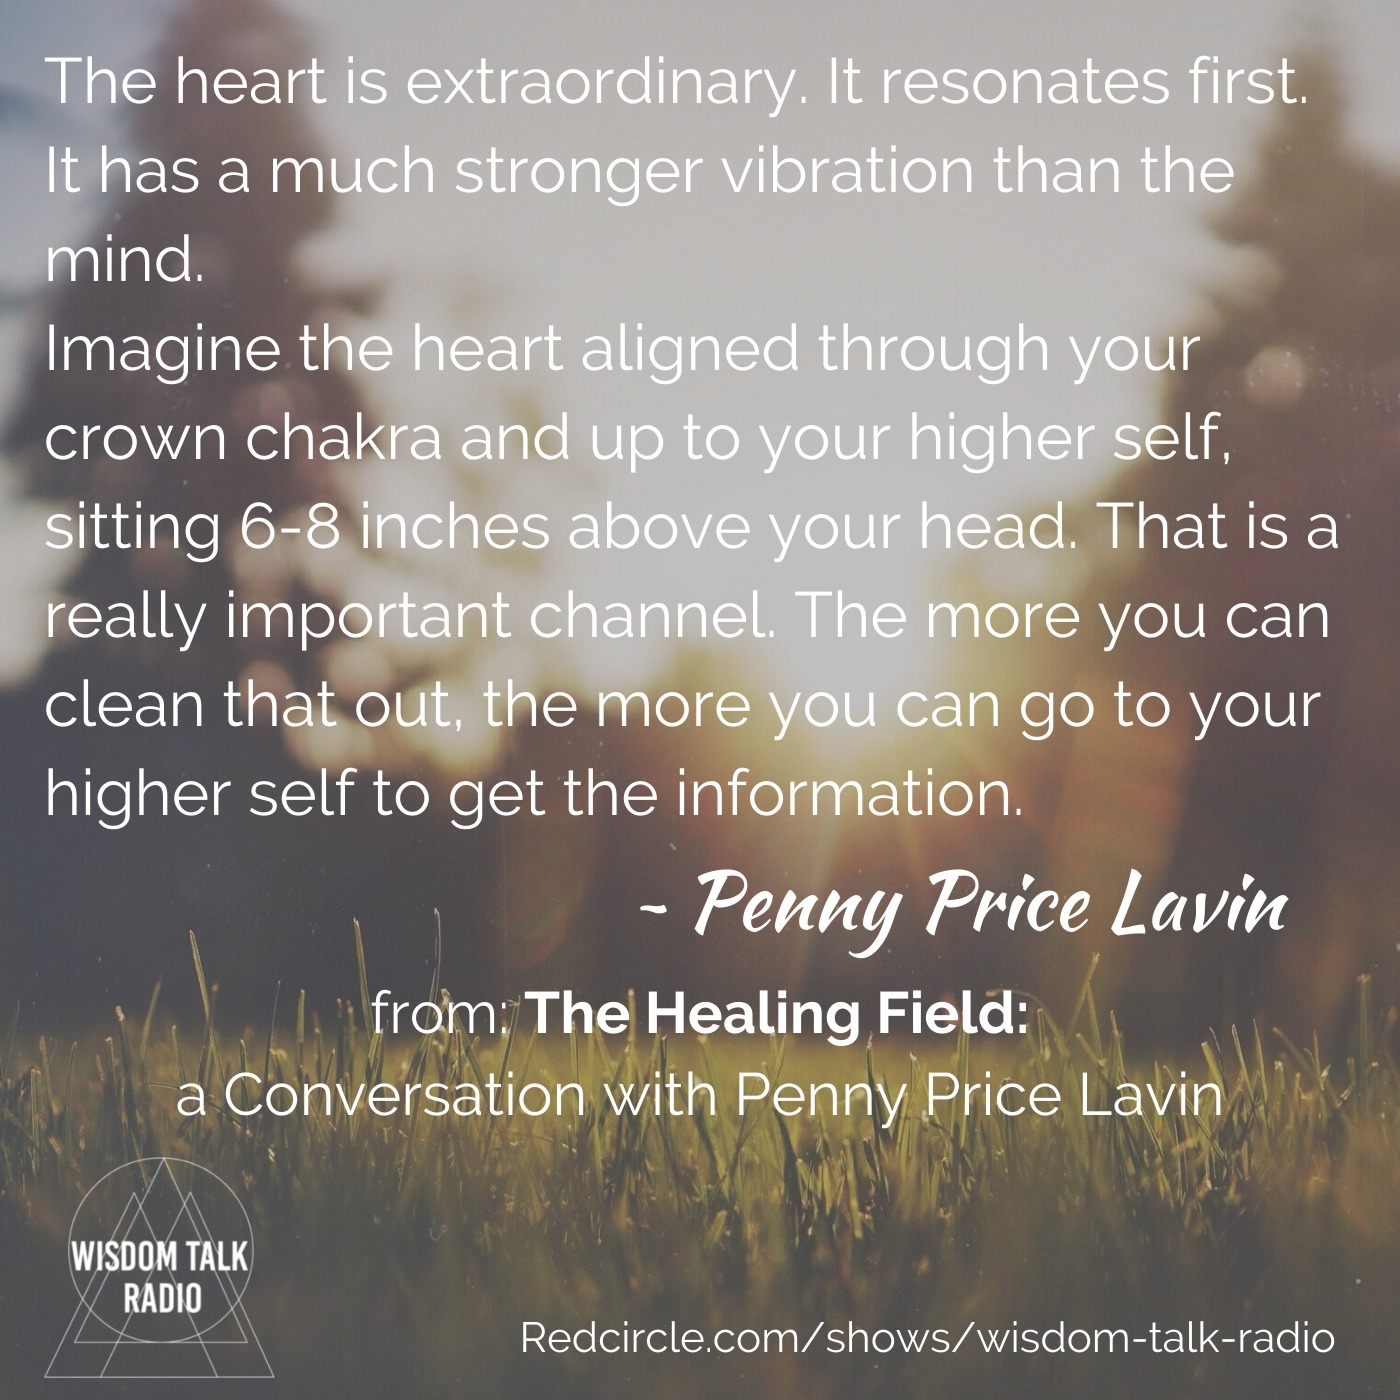 The Healing Field: a conversation with Penny Price Lavin